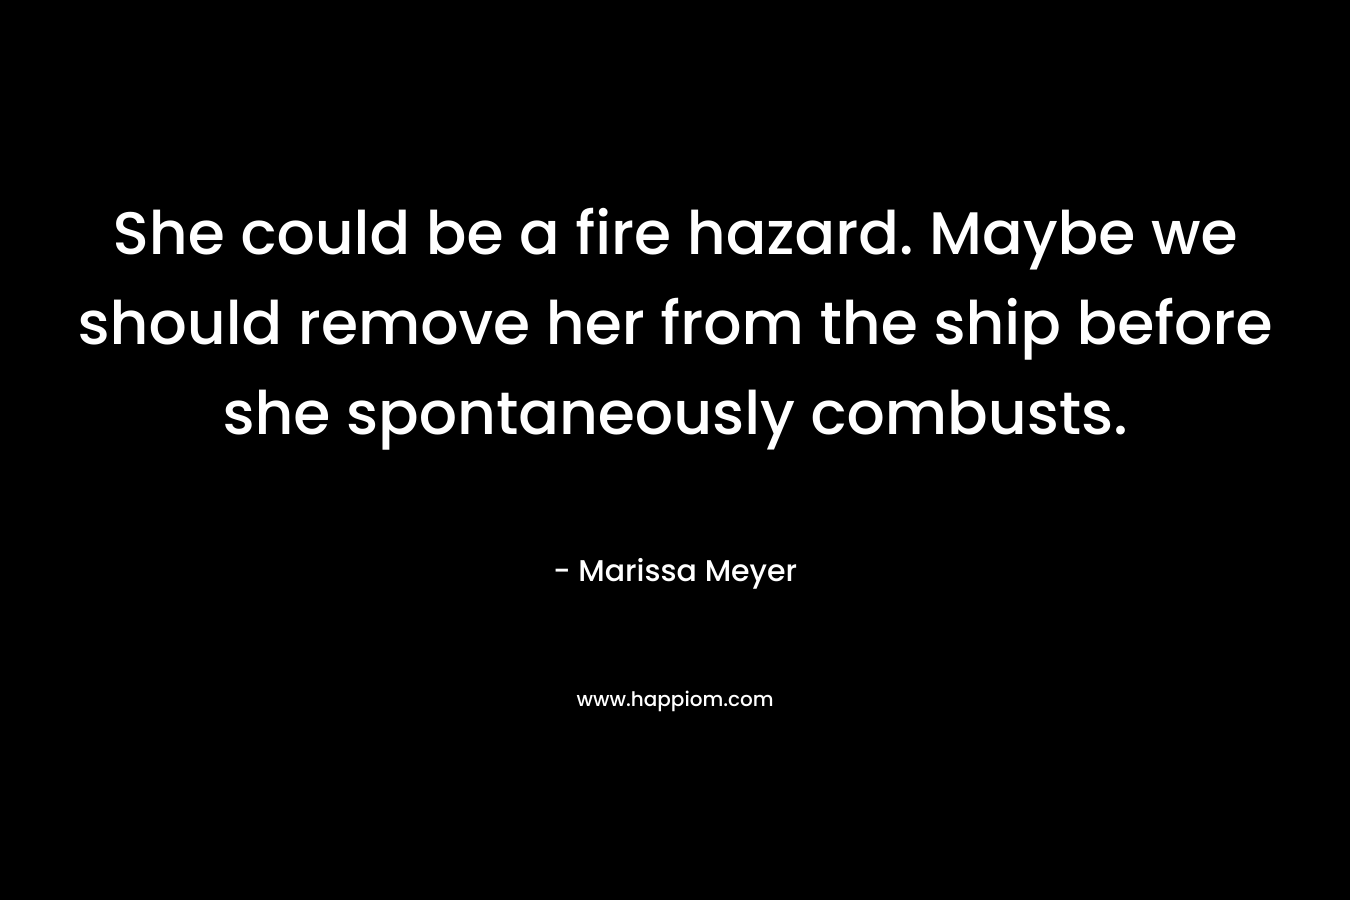 She could be a fire hazard. Maybe we should remove her from the ship before she spontaneously combusts. – Marissa Meyer